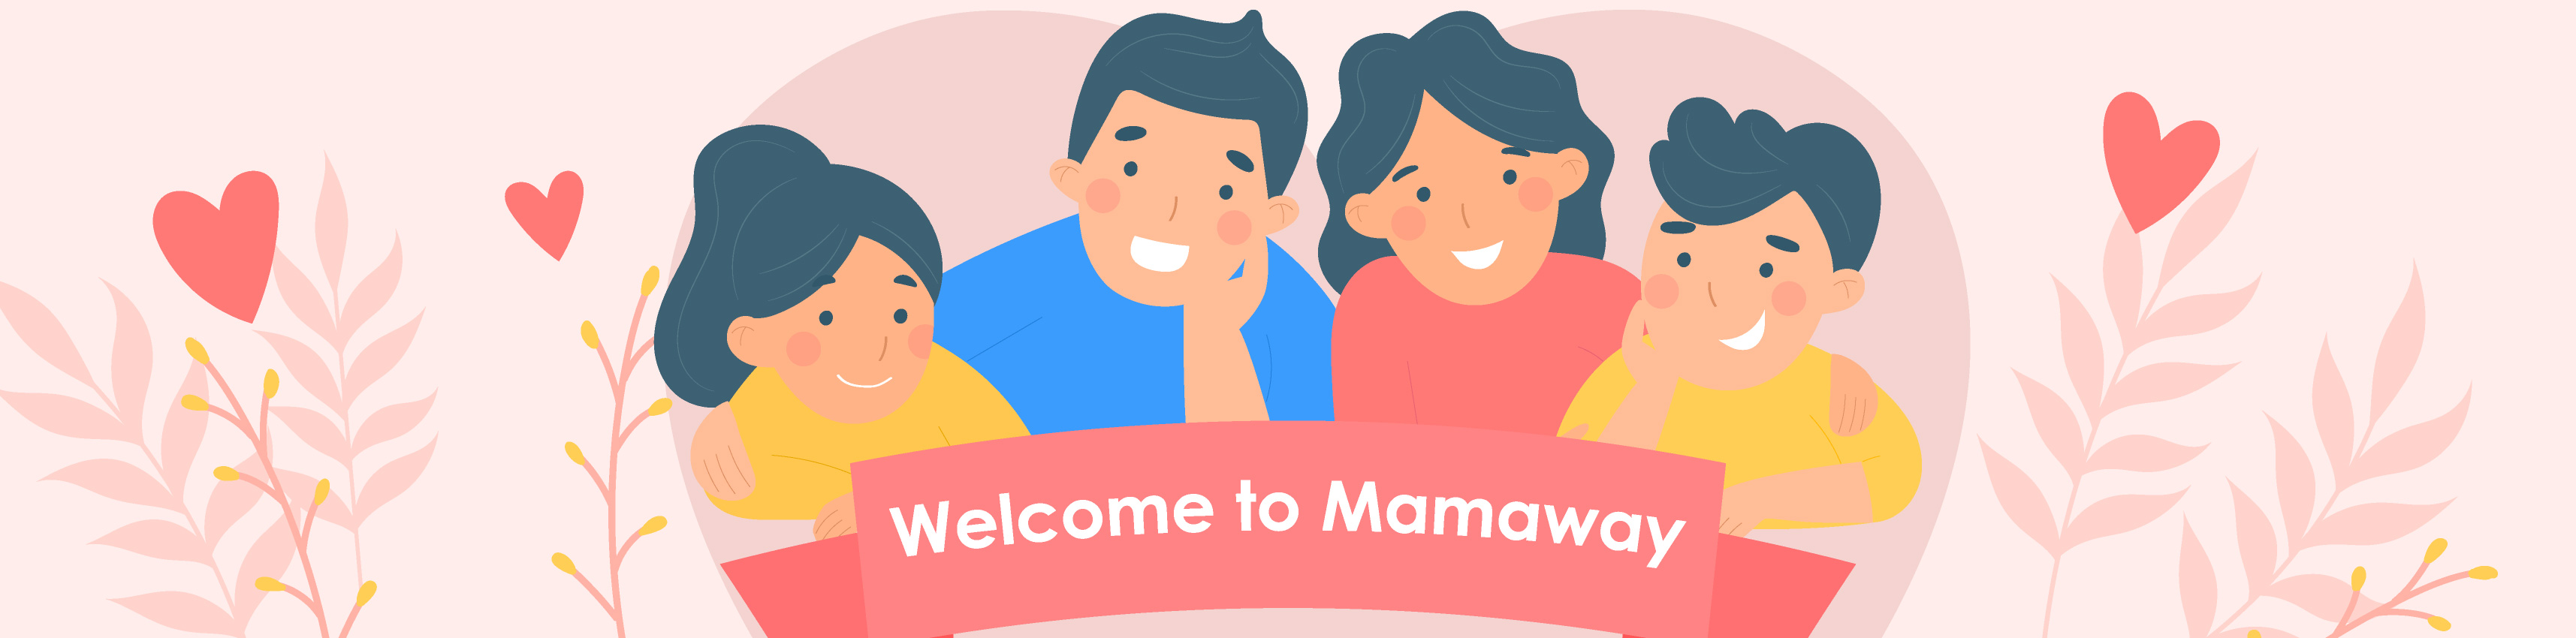 Welcome to Mamaway's